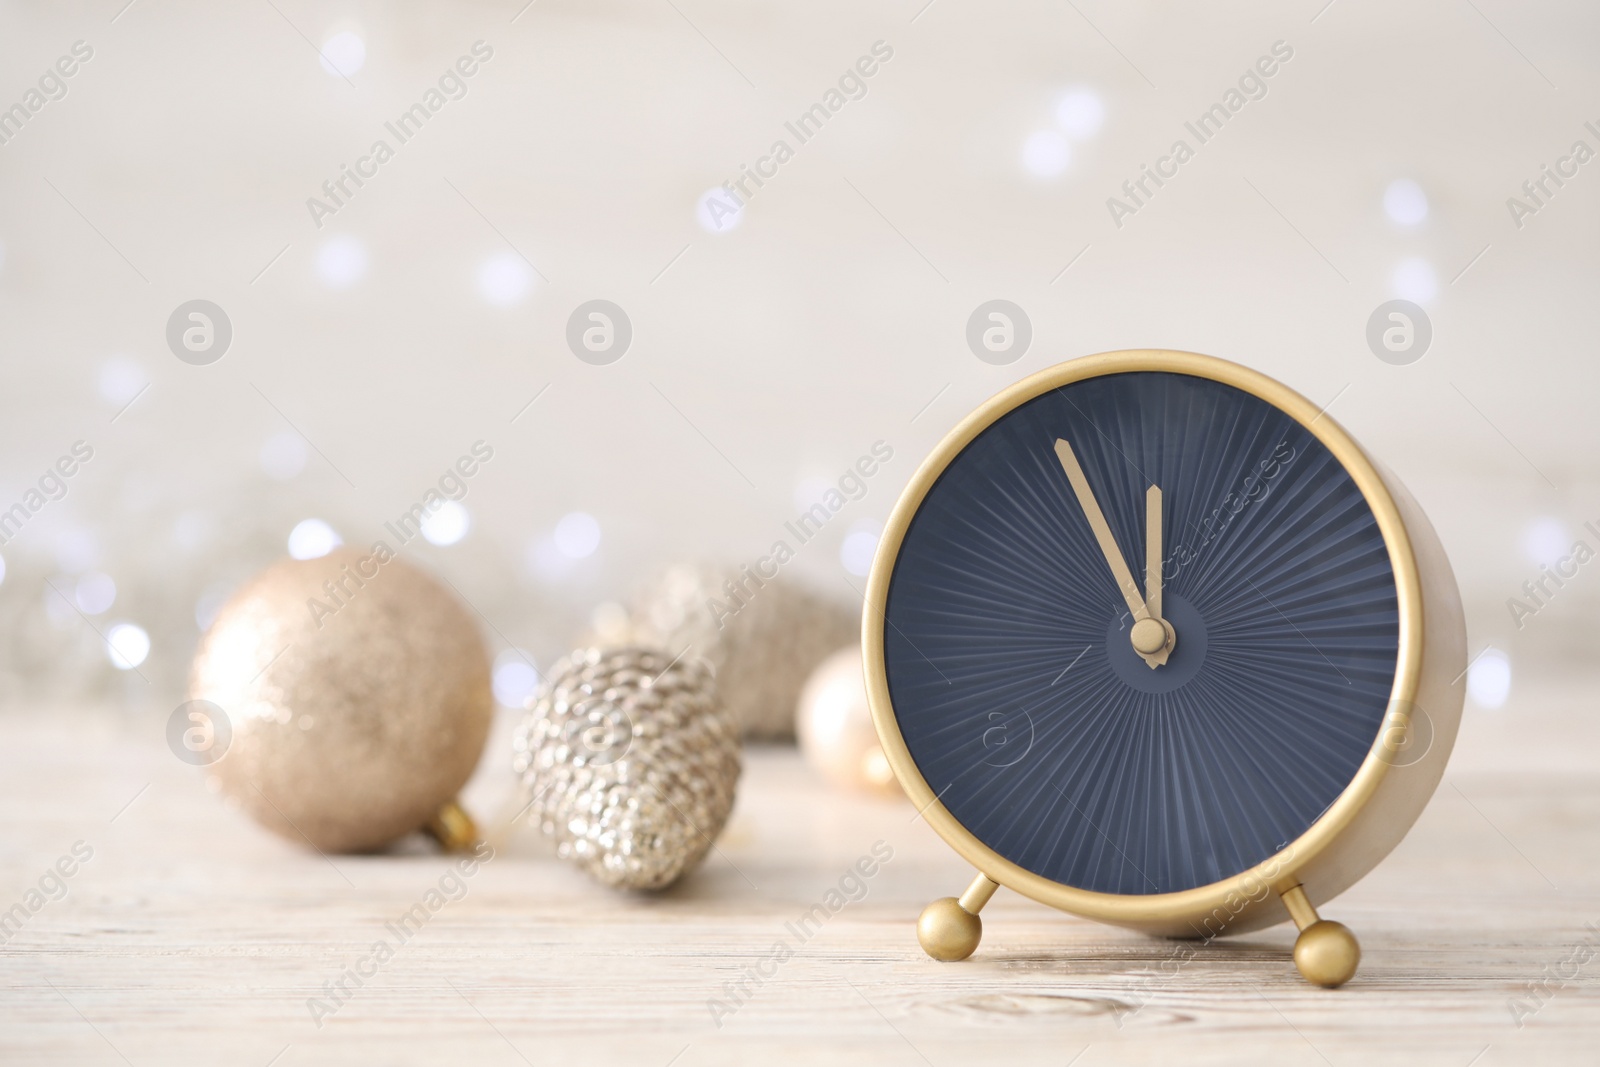 Photo of Stylish clock with decor on white wooden table against blurred Christmas lights, closeup. New Year countdown